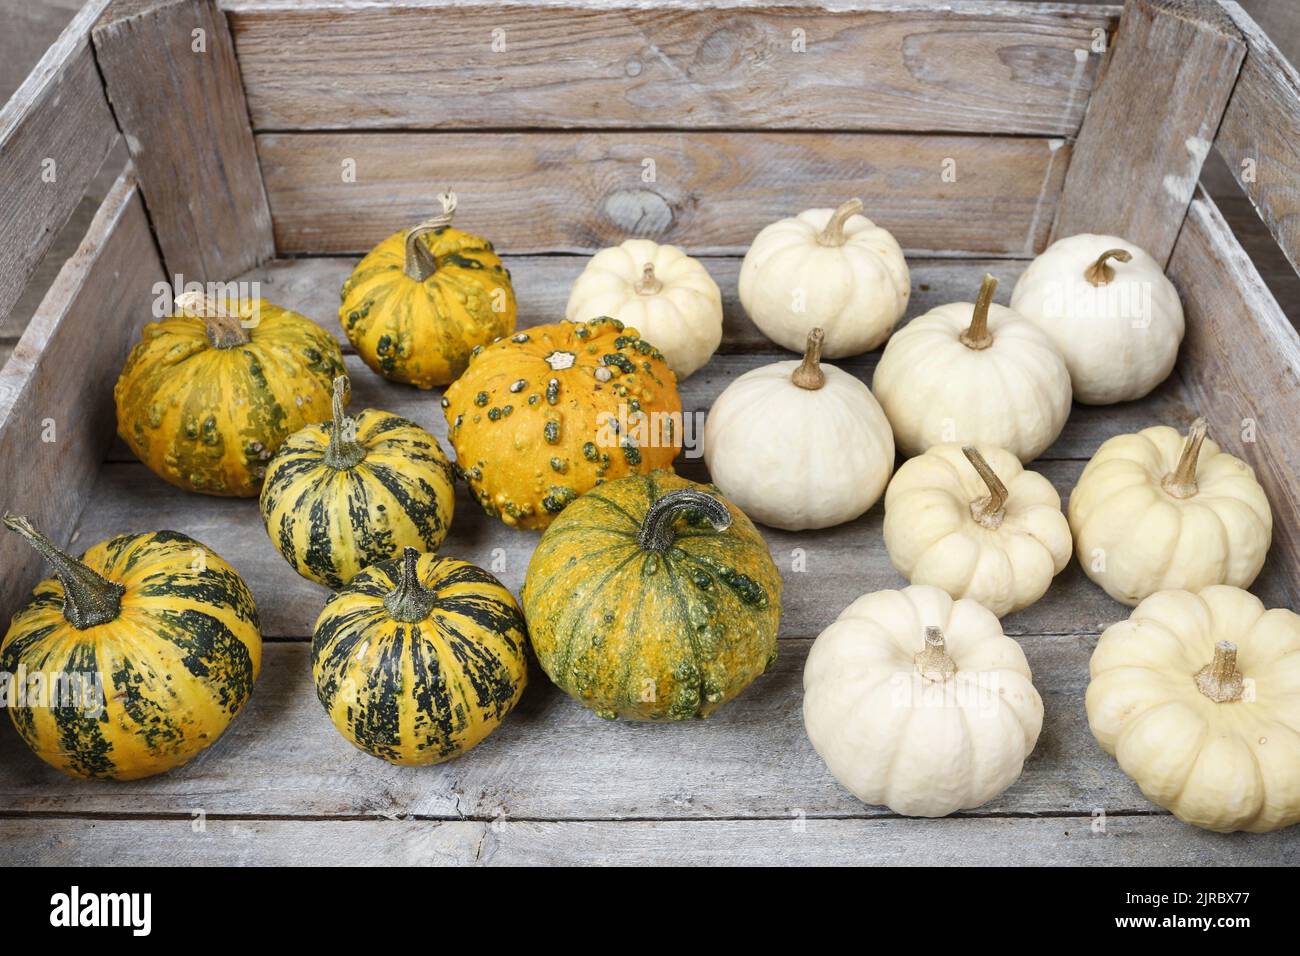 Wooden box with colorful pumpkins. Autumn decor Stock Photo